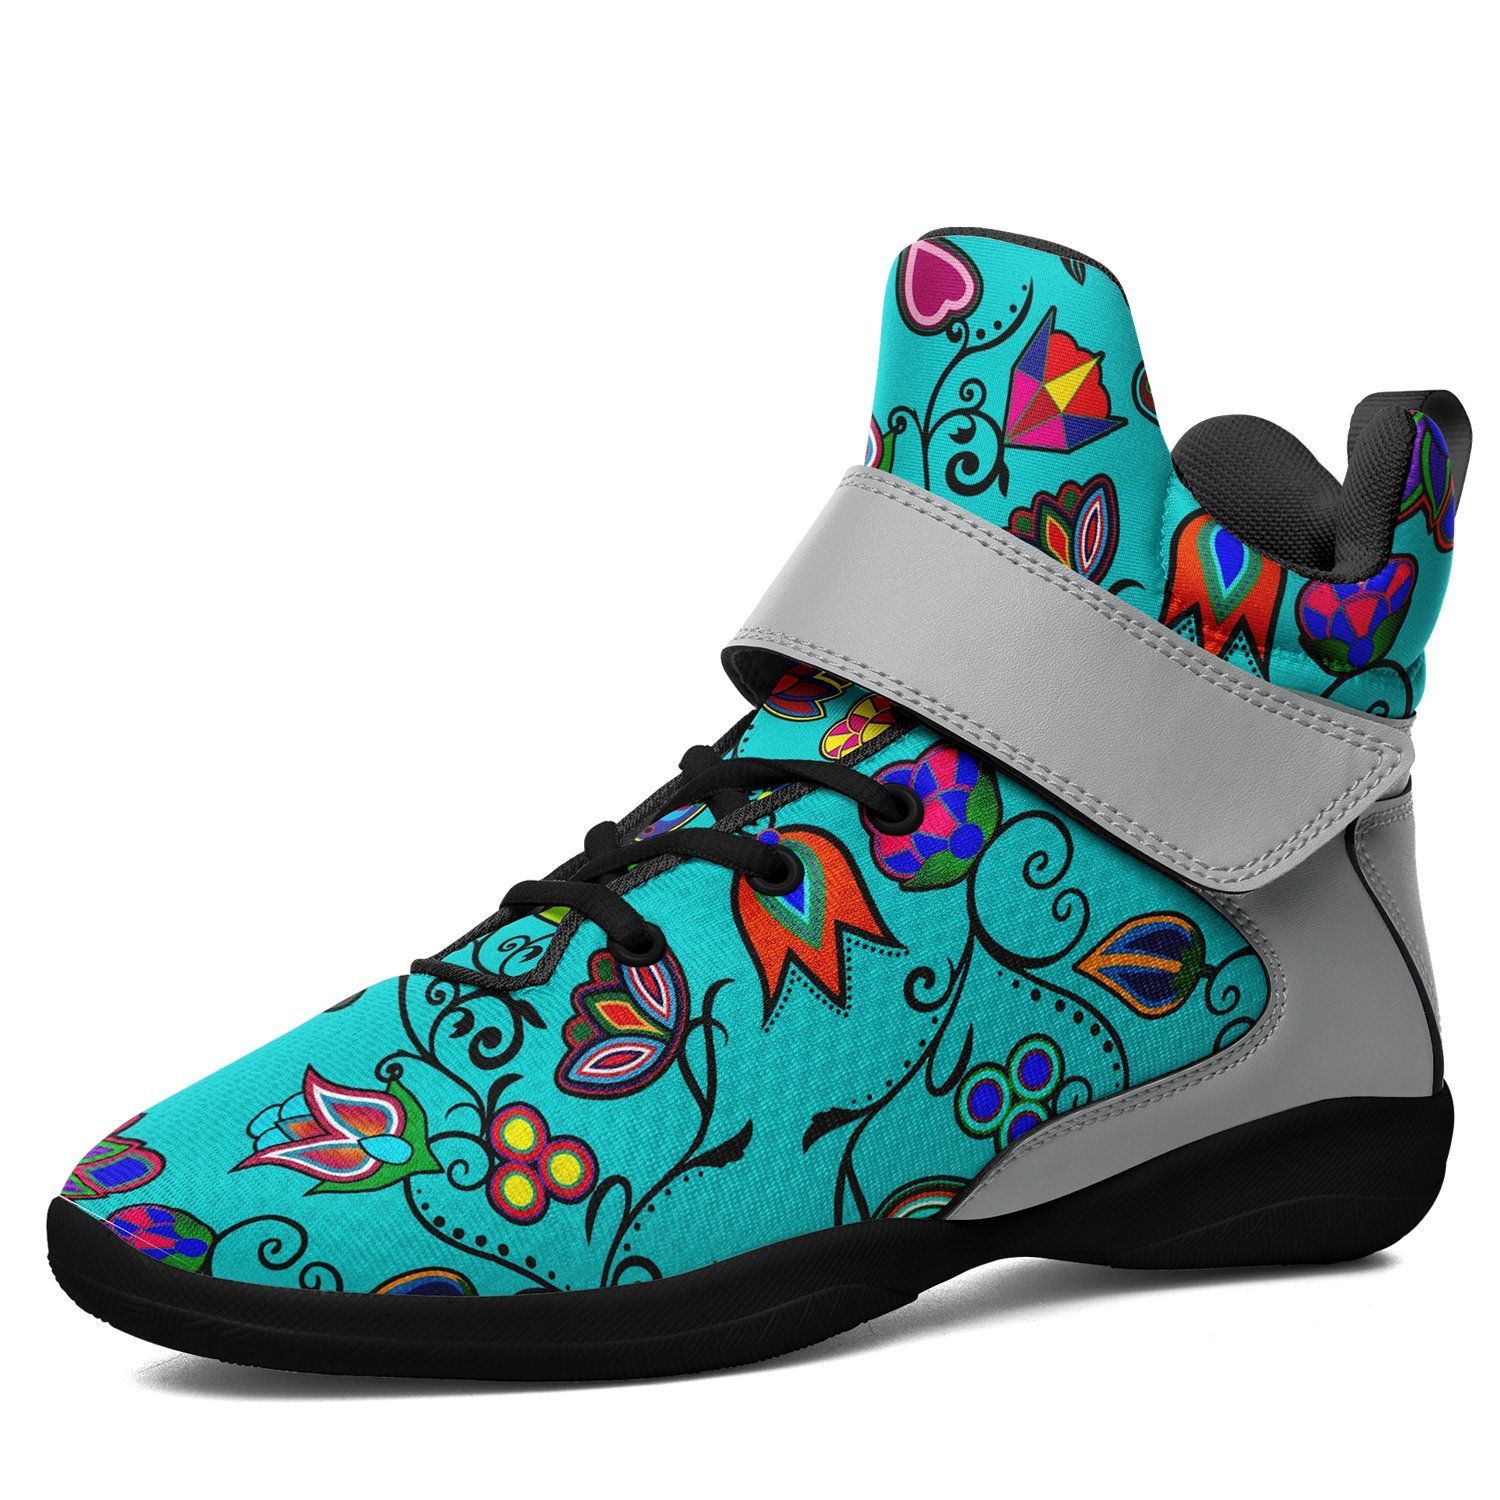 Indigenous Paisley Sky Ipottaa Basketball / Sport High Top Shoes - Black Sole 49 Dzine US Women 8.5 / US Men 7 / EUR 40 Black Sole with Gray Strap 